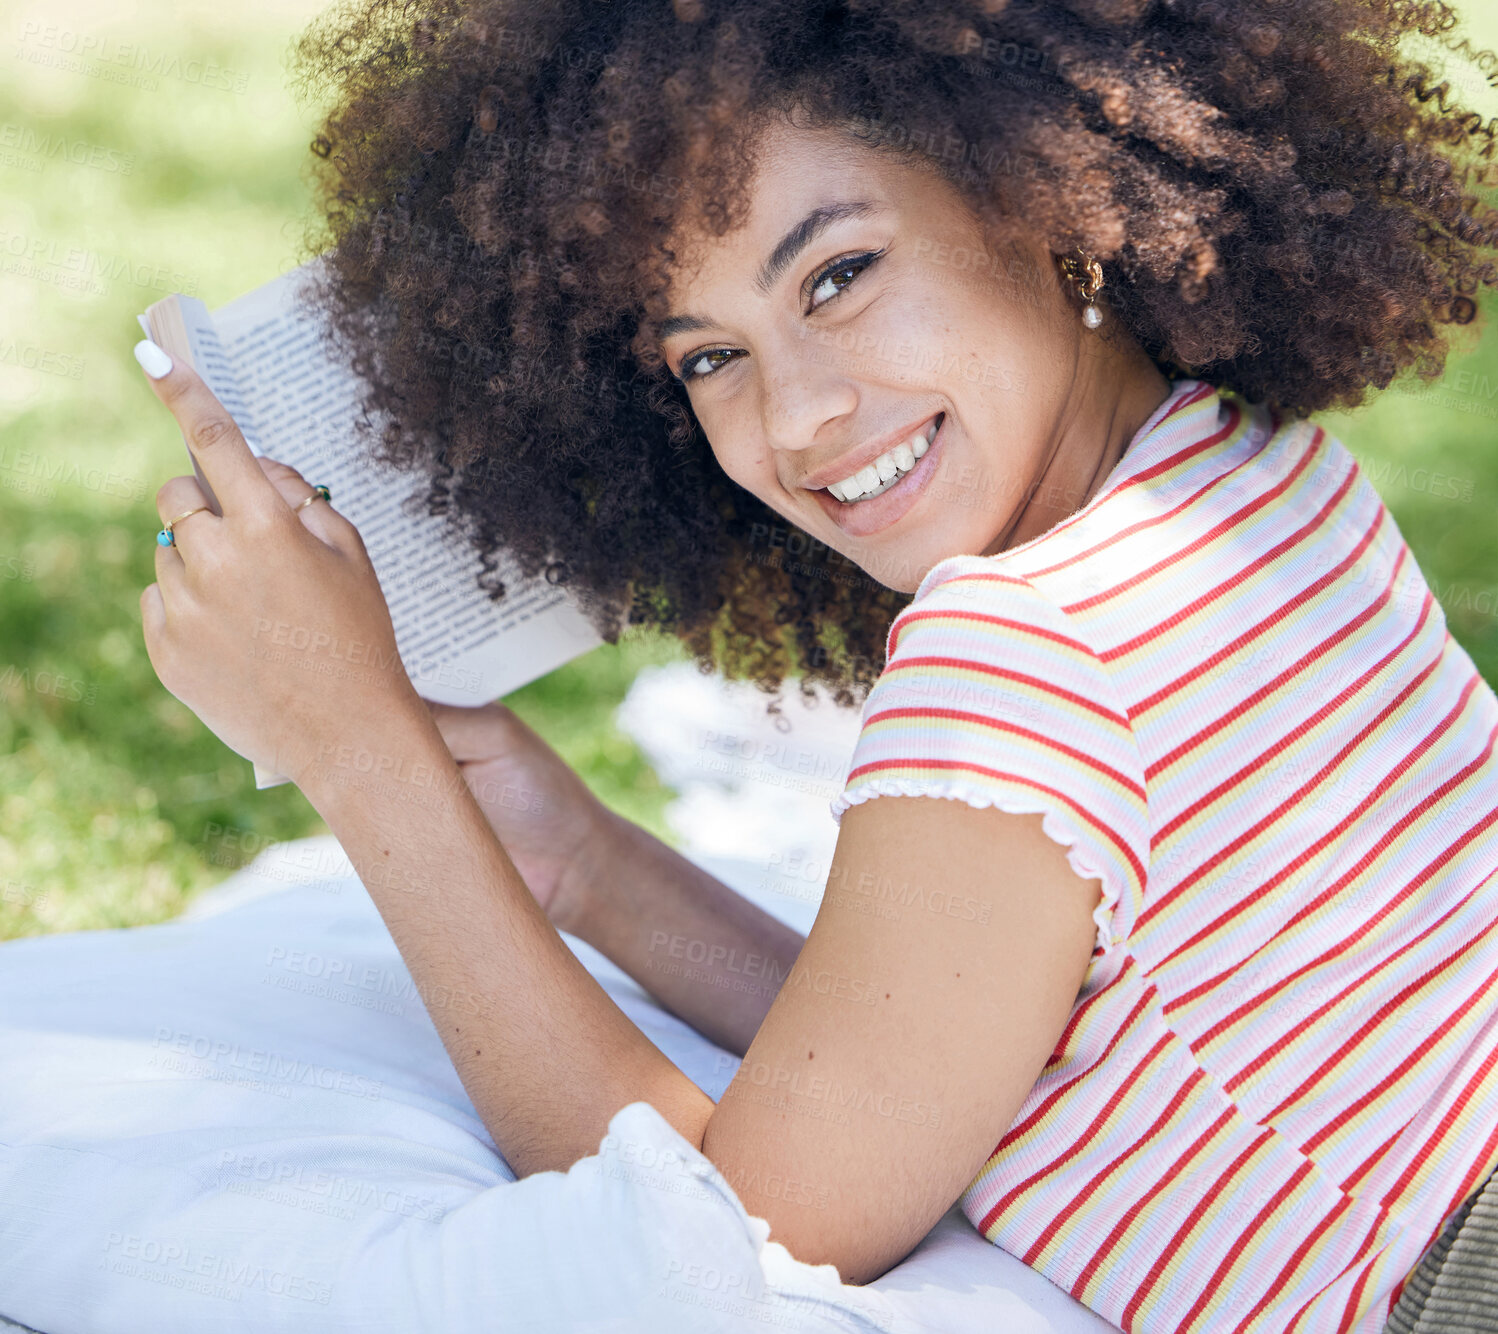 Buy stock photo Smile with book, reading and black woman in the park for a picnic with a blanket outdoors in nature portrait. Happy, young person relaxing and hobbies, learning on a break on the weekend in spring.